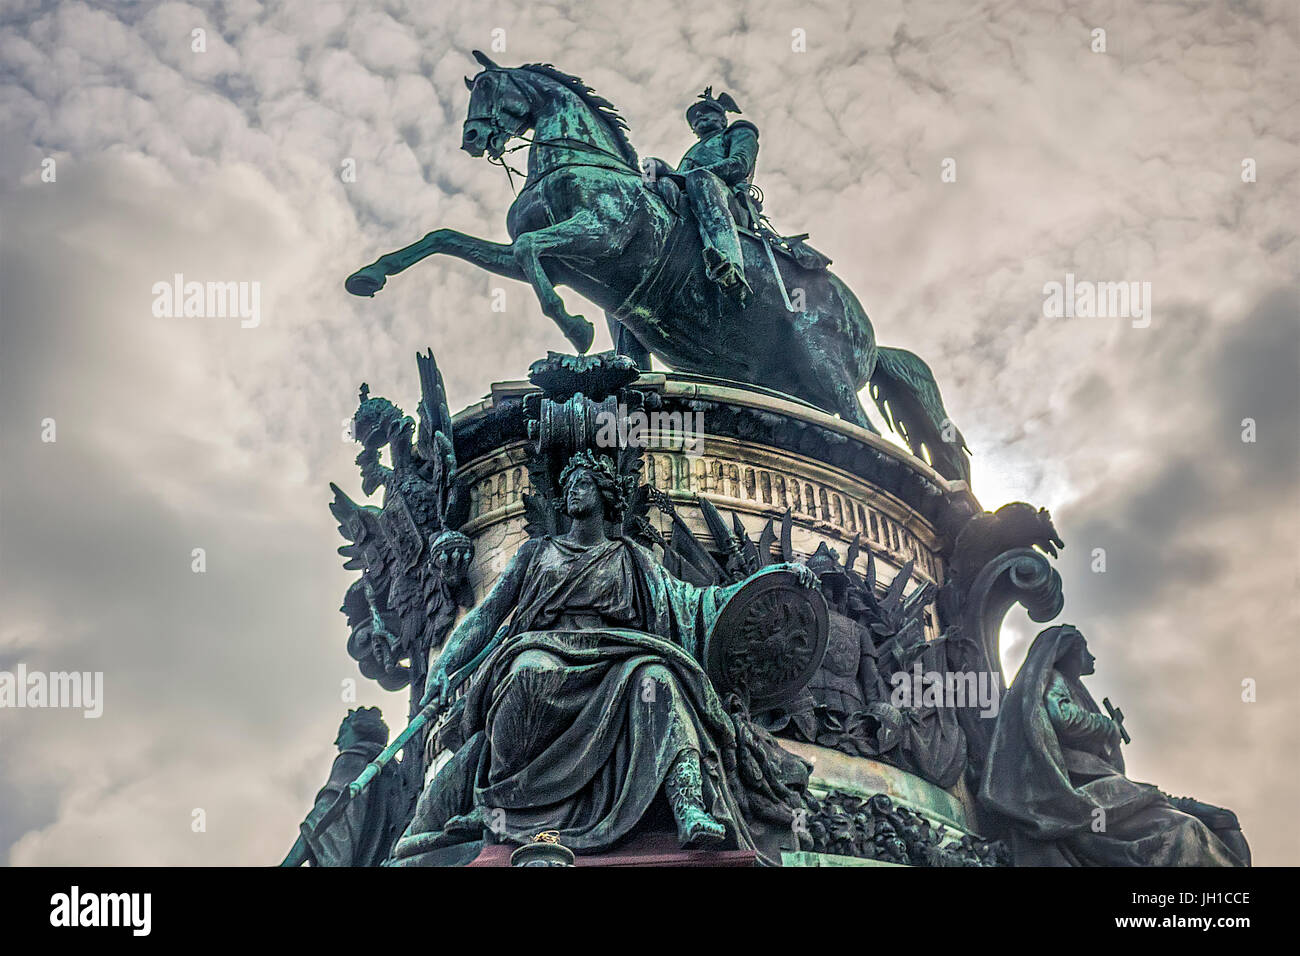 Statue Of Peter The Great Saint Petersburg Russia Stock Photo